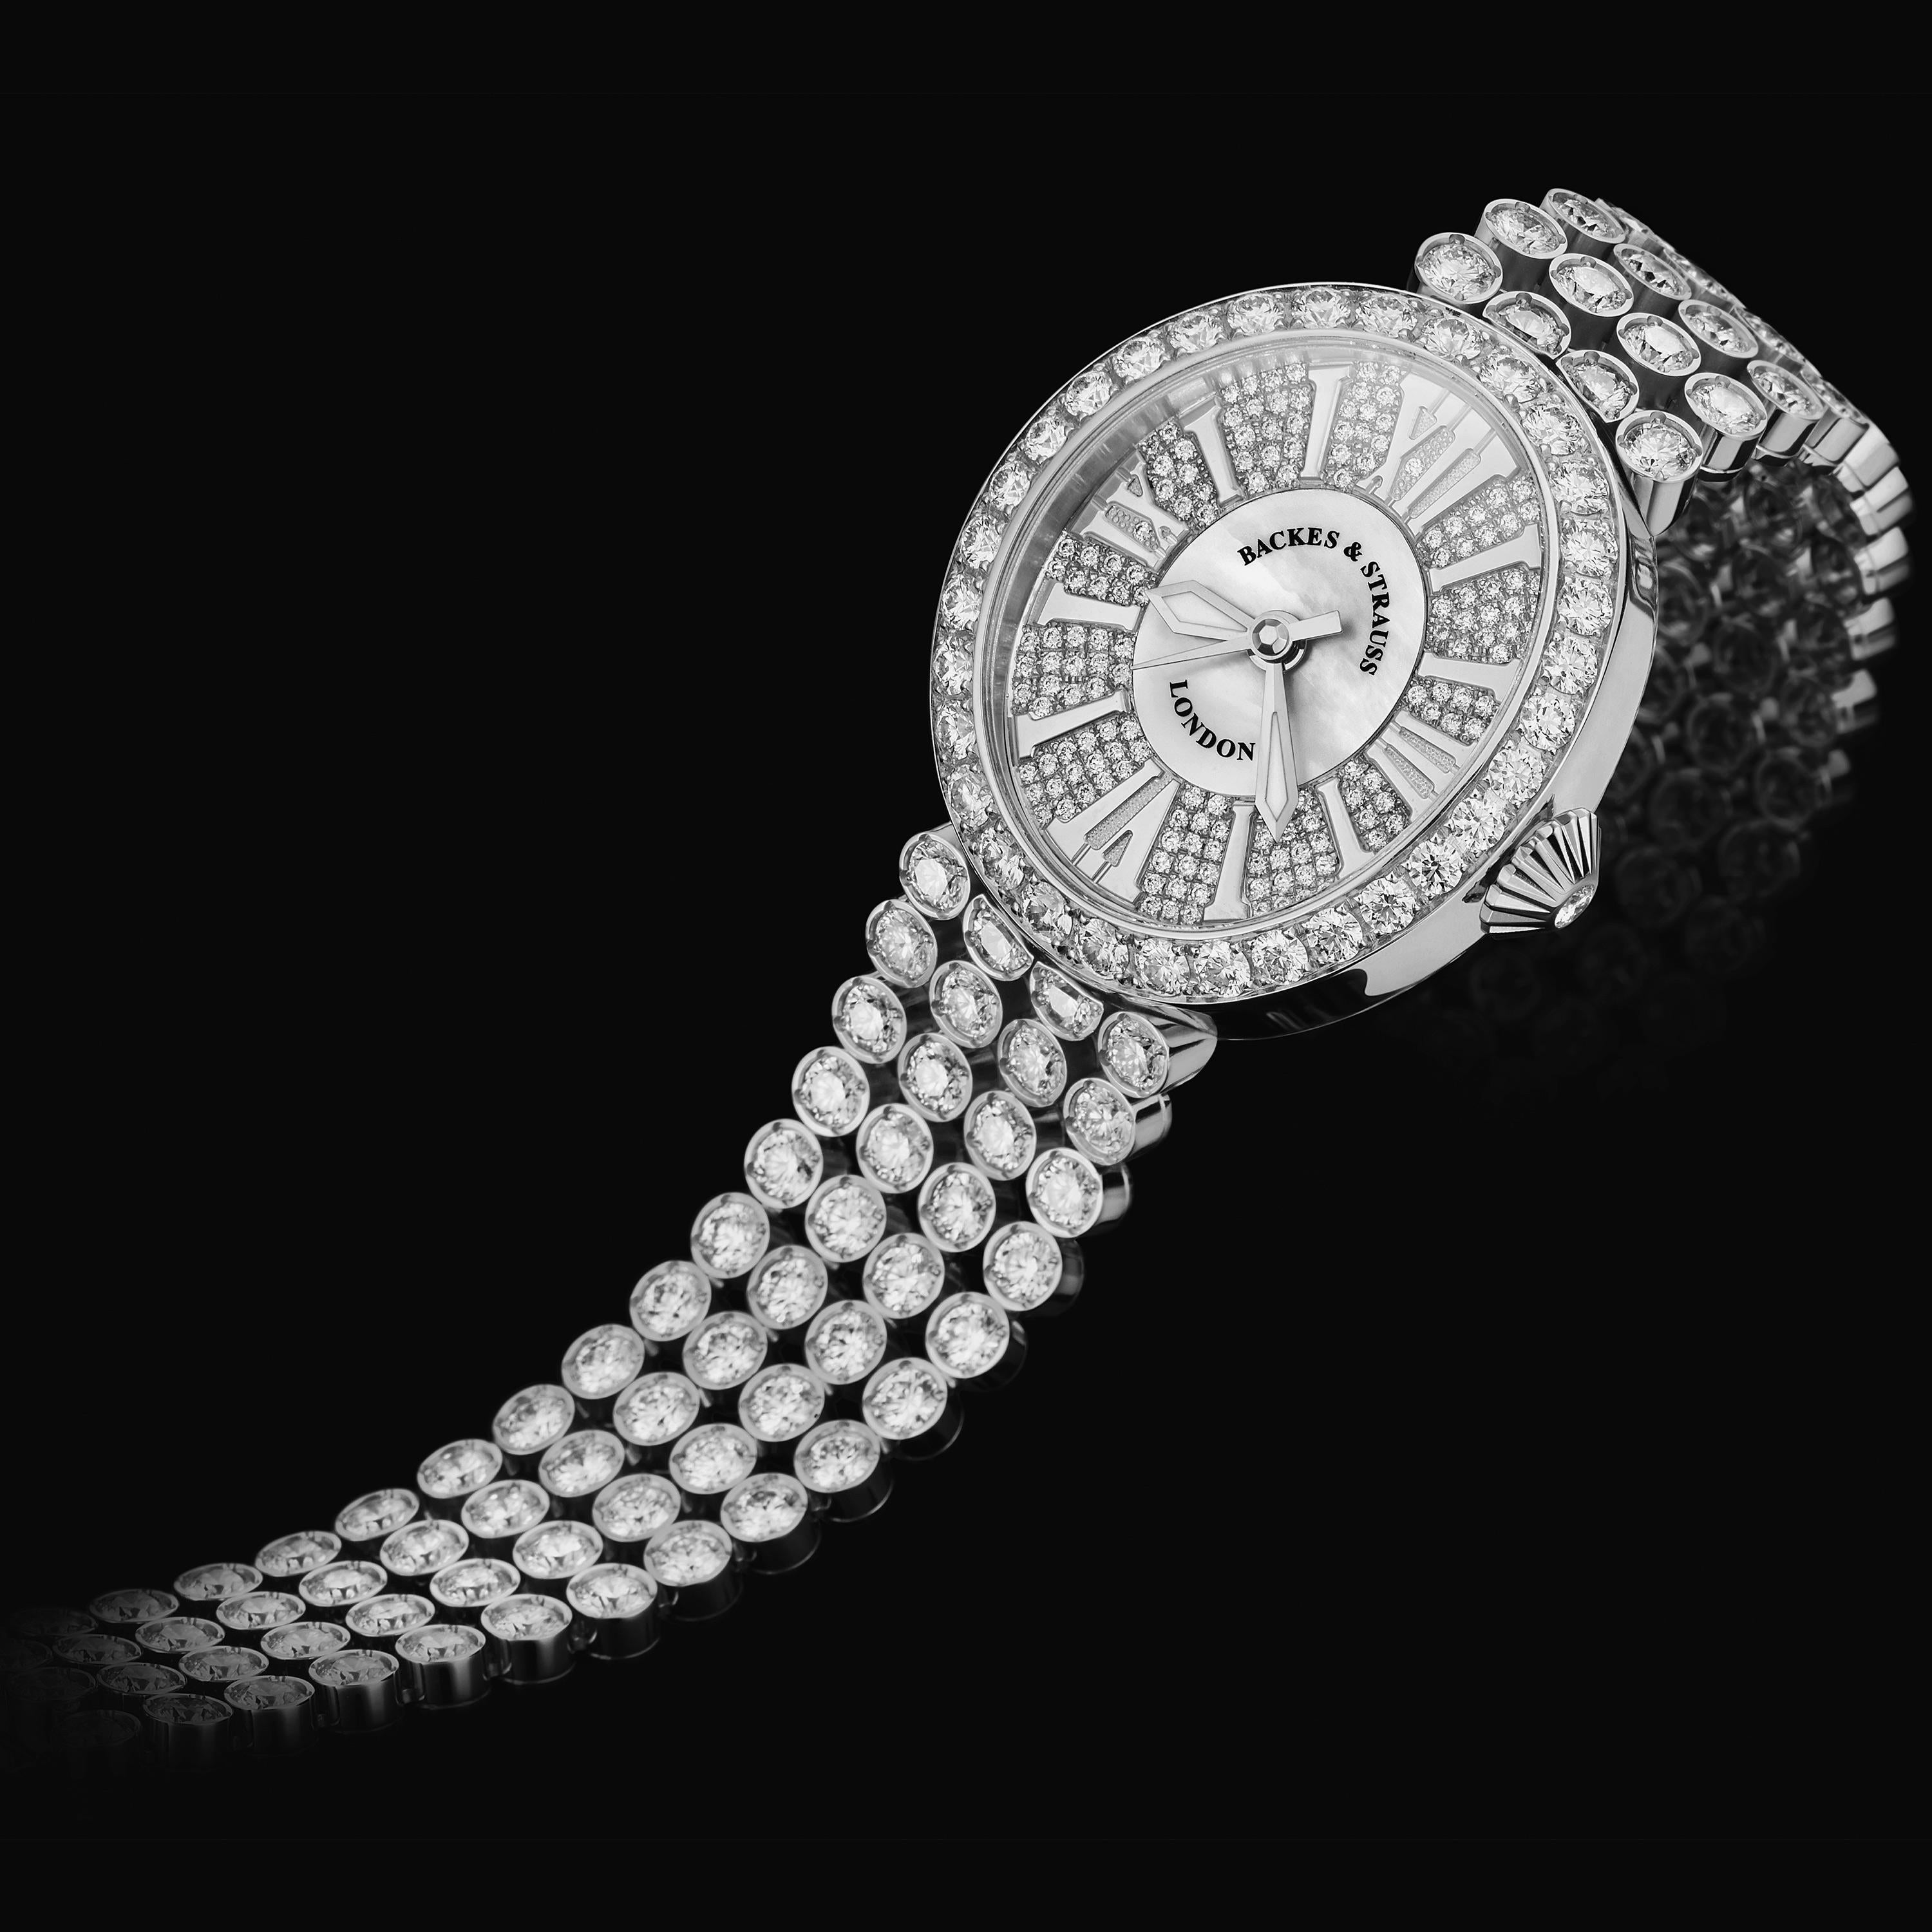 Regent Princess 3238 is a luxury diamond watch for women crafted in 18kt White gold, featuring the mother-of-pearl oval dial with the white gold roman numerals, quartz movement. The case, dial and the crown are set with white Ideal Cut diamonds. It